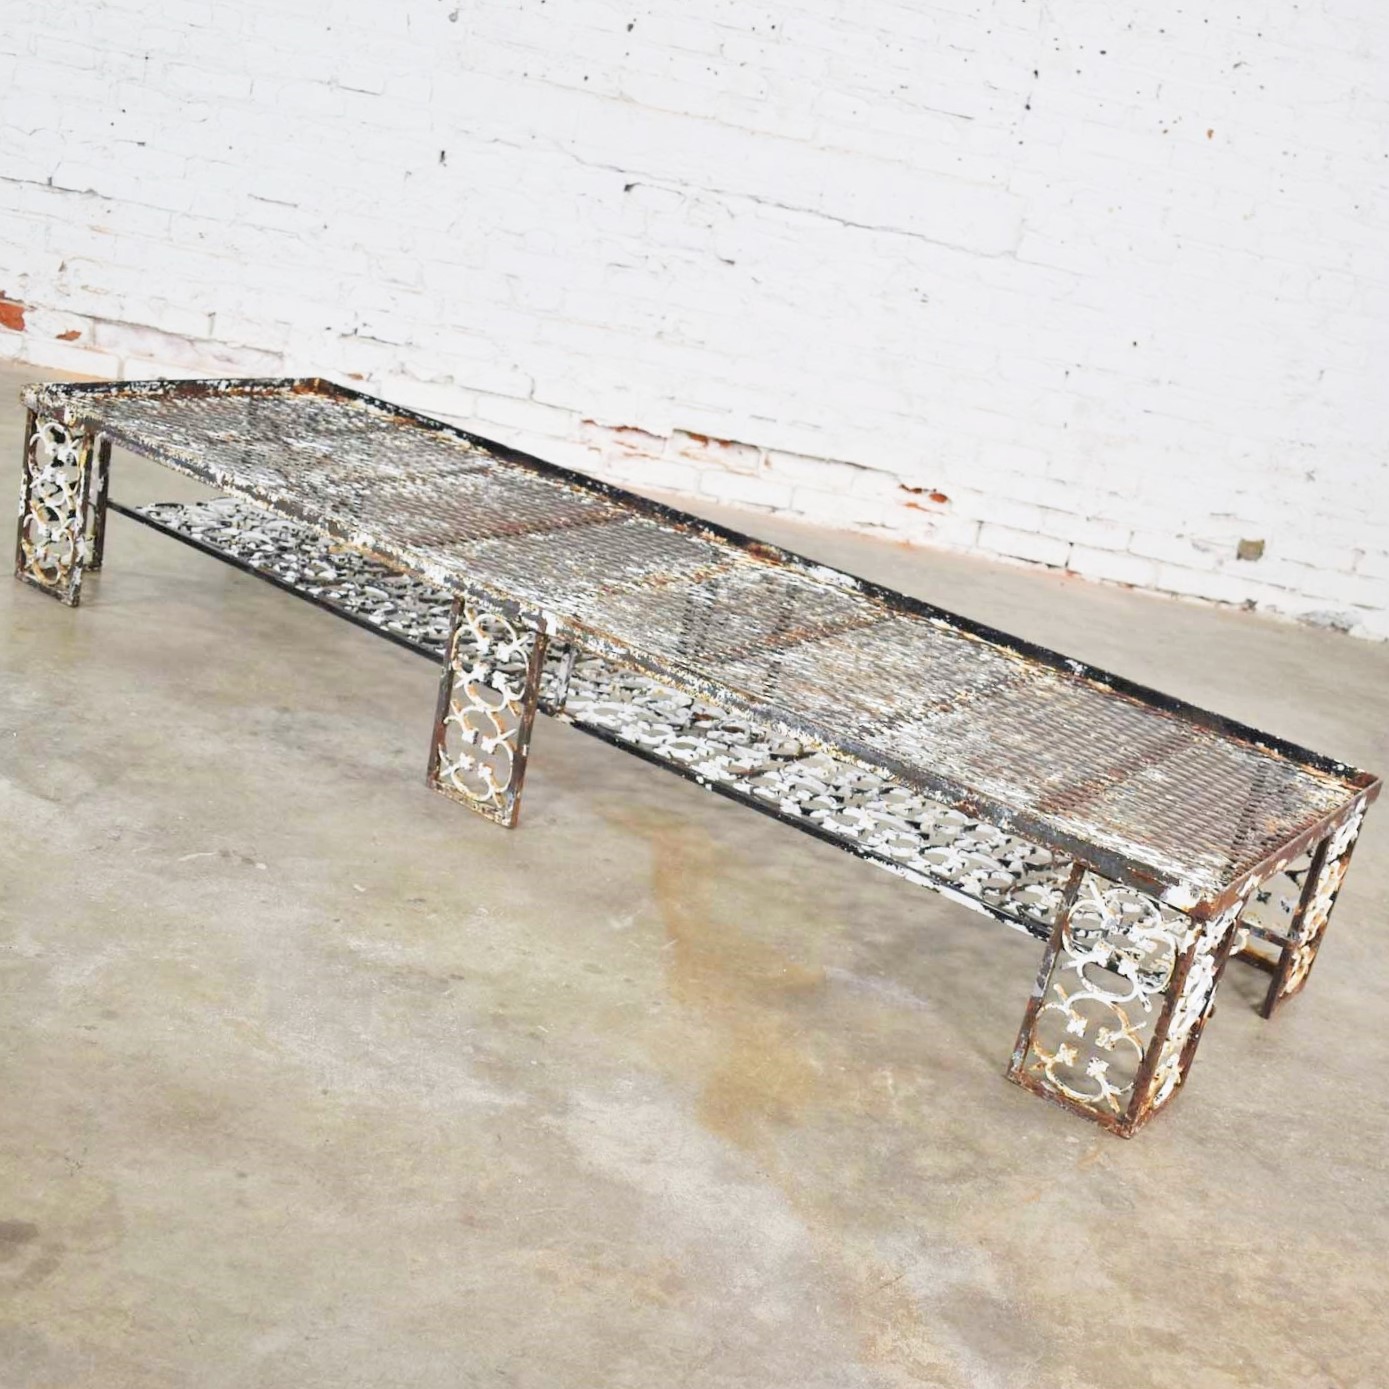 Antique Rustic Patinated Cast Iron Ornate Patio Garden Coffee Table Bench Daybed